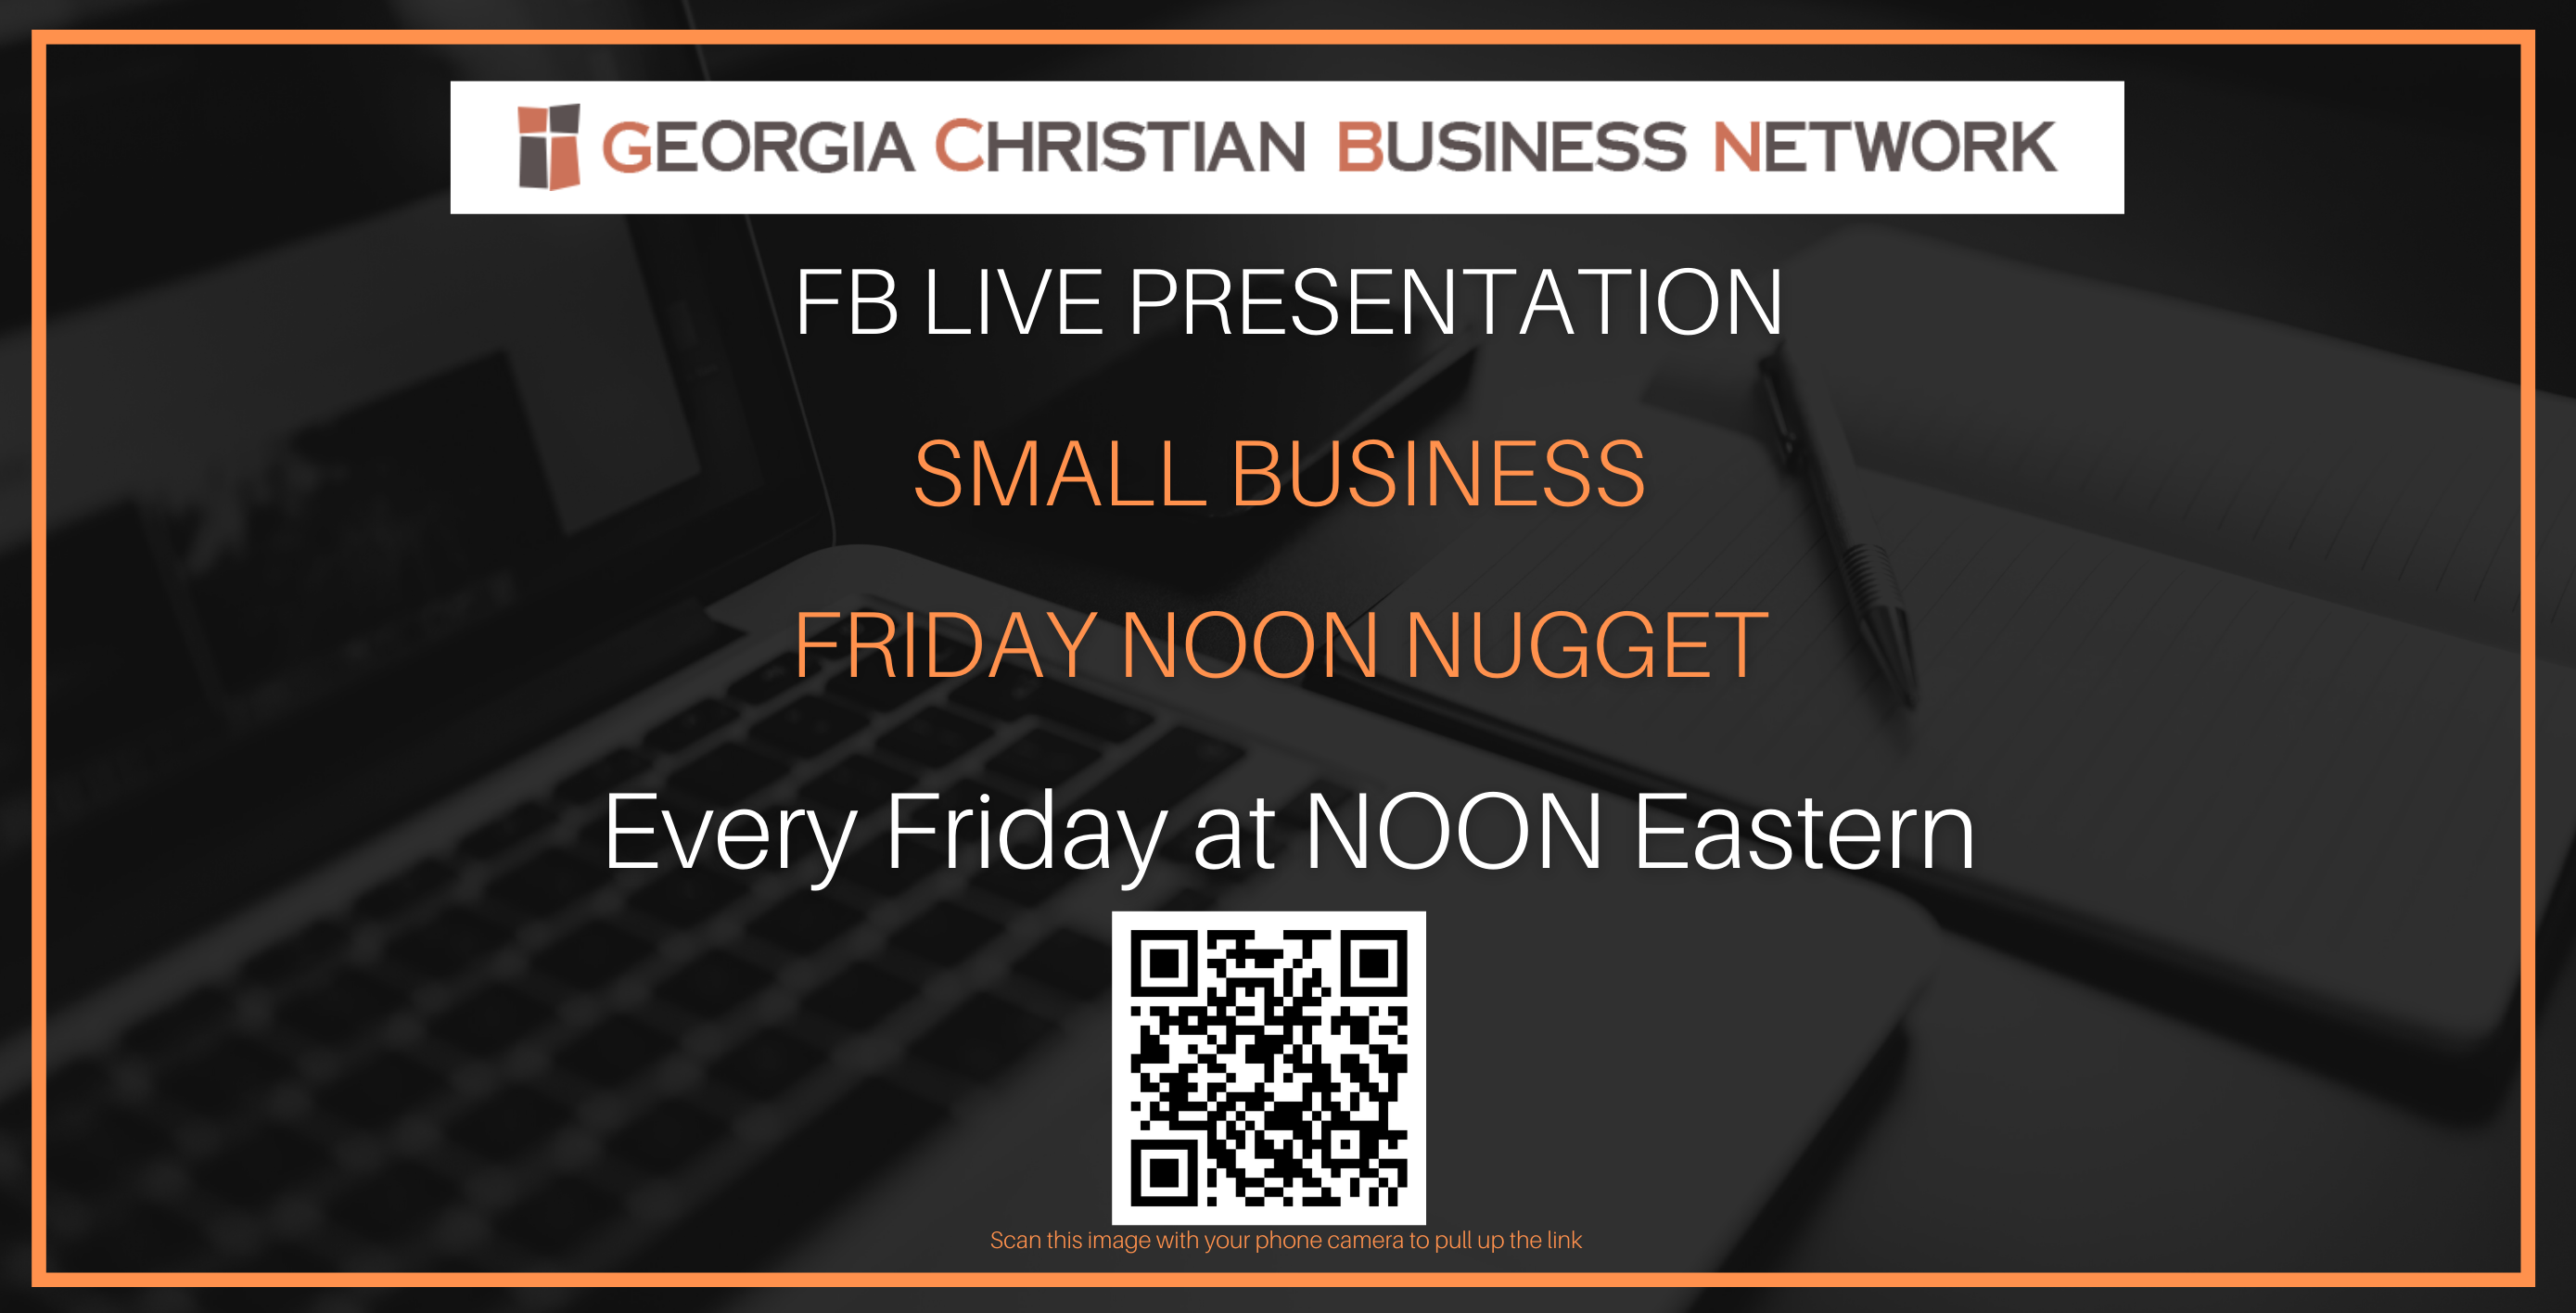 Copy of Small Business Friday Business Empowerment (926 x 472 px)